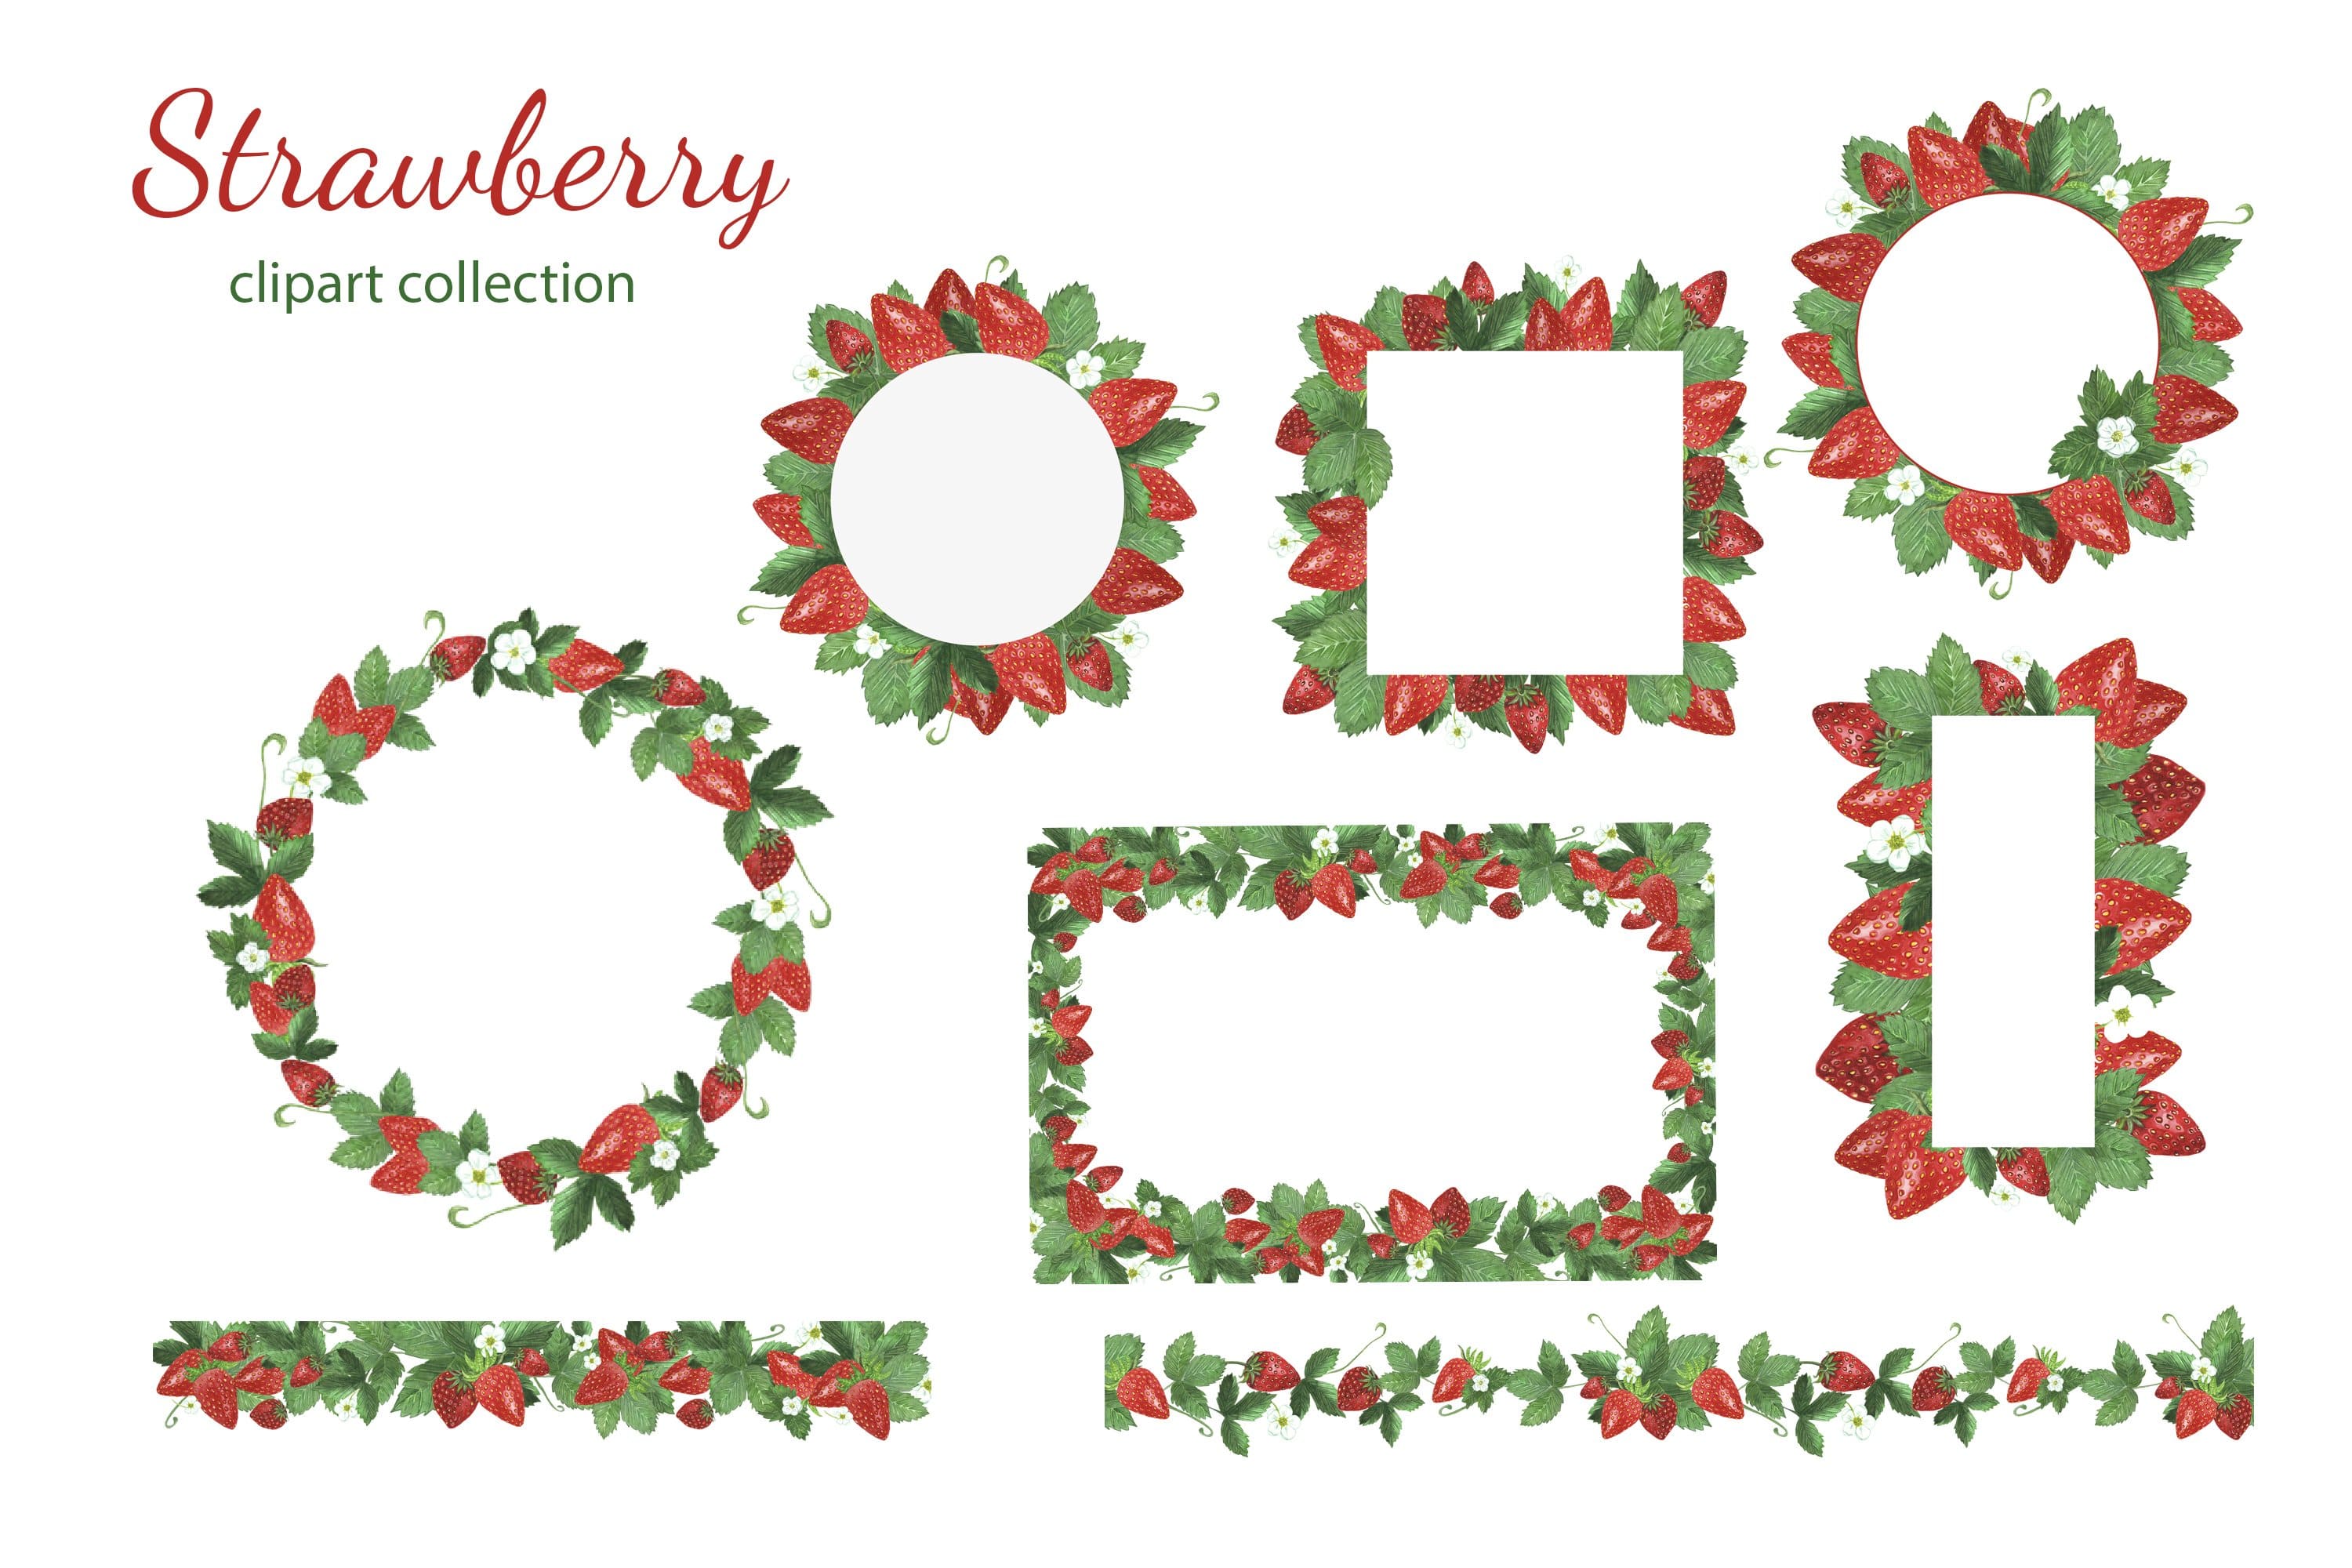 Frames of strawberries and green leaves of different shapes.